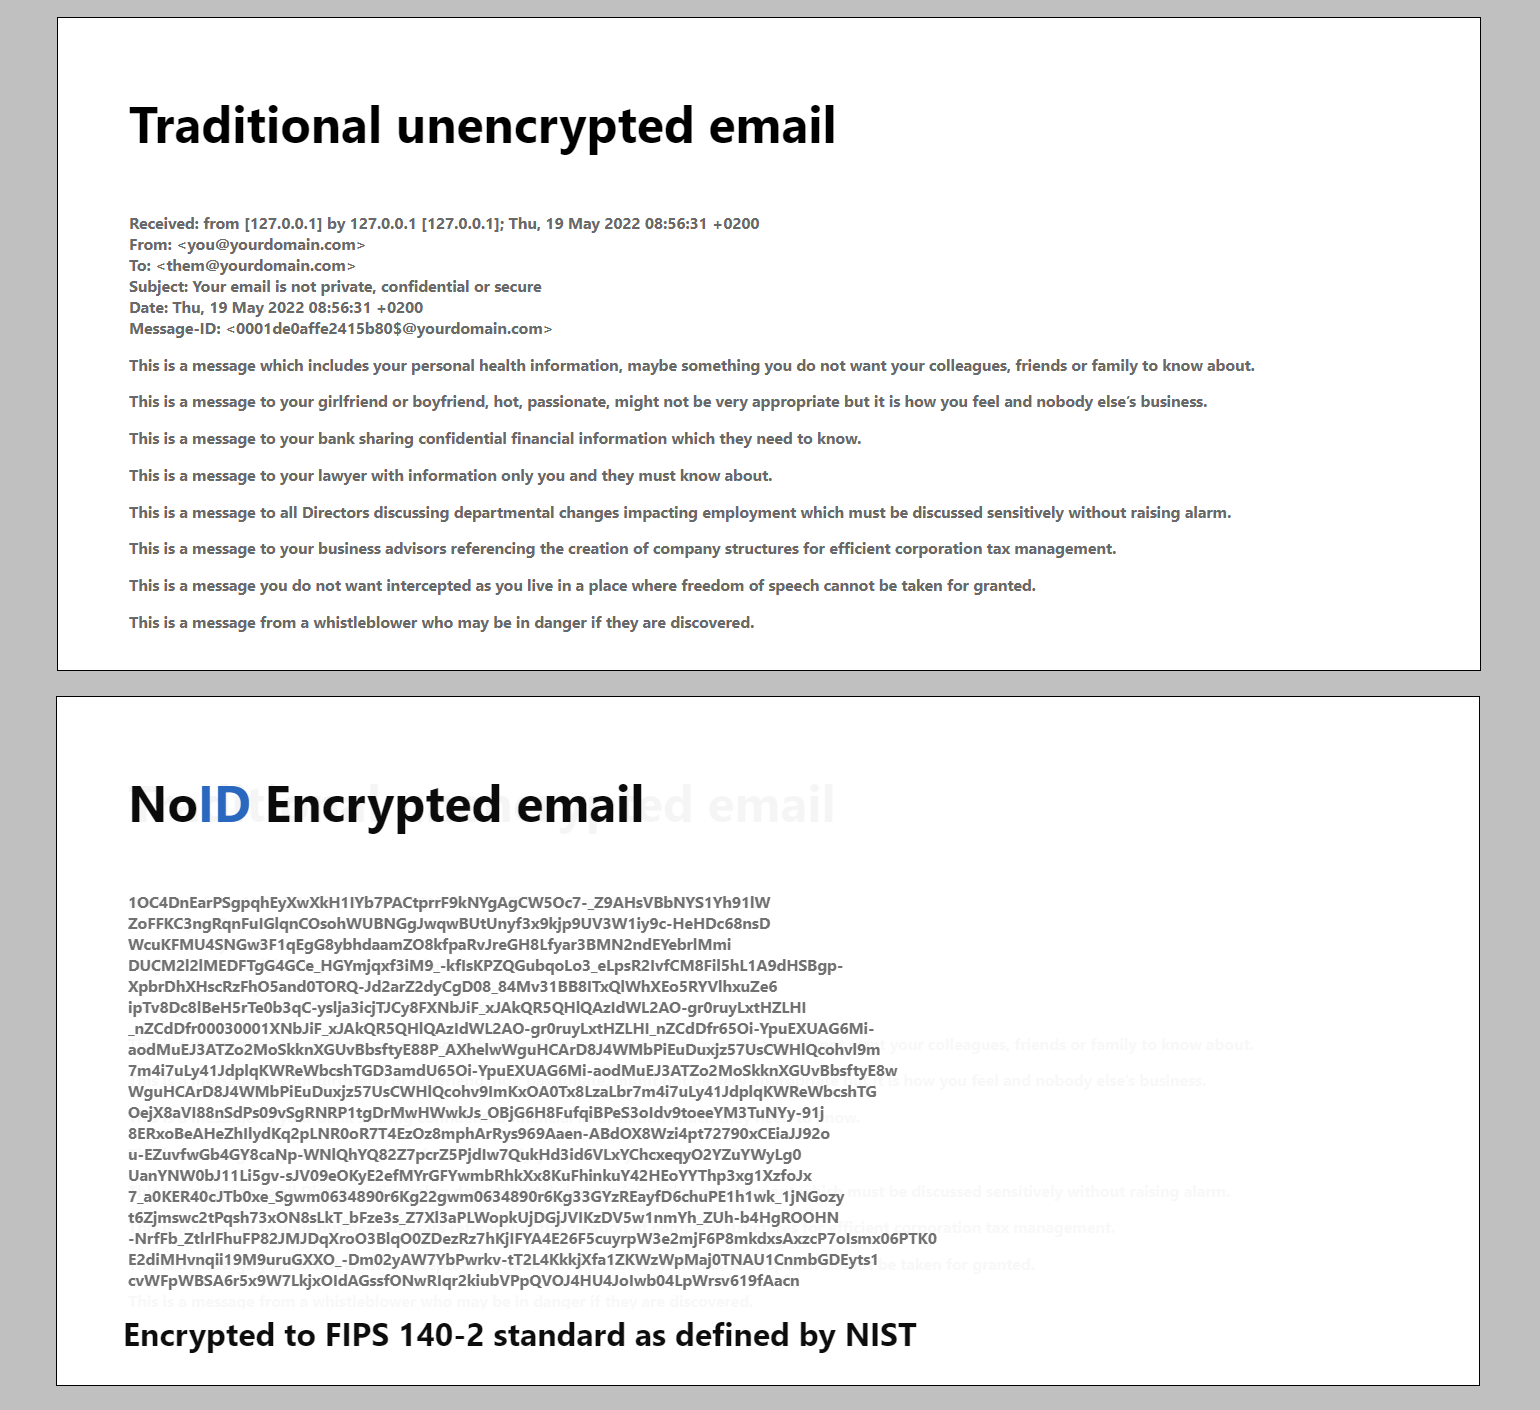 Traditional plain text email vs encrypted email